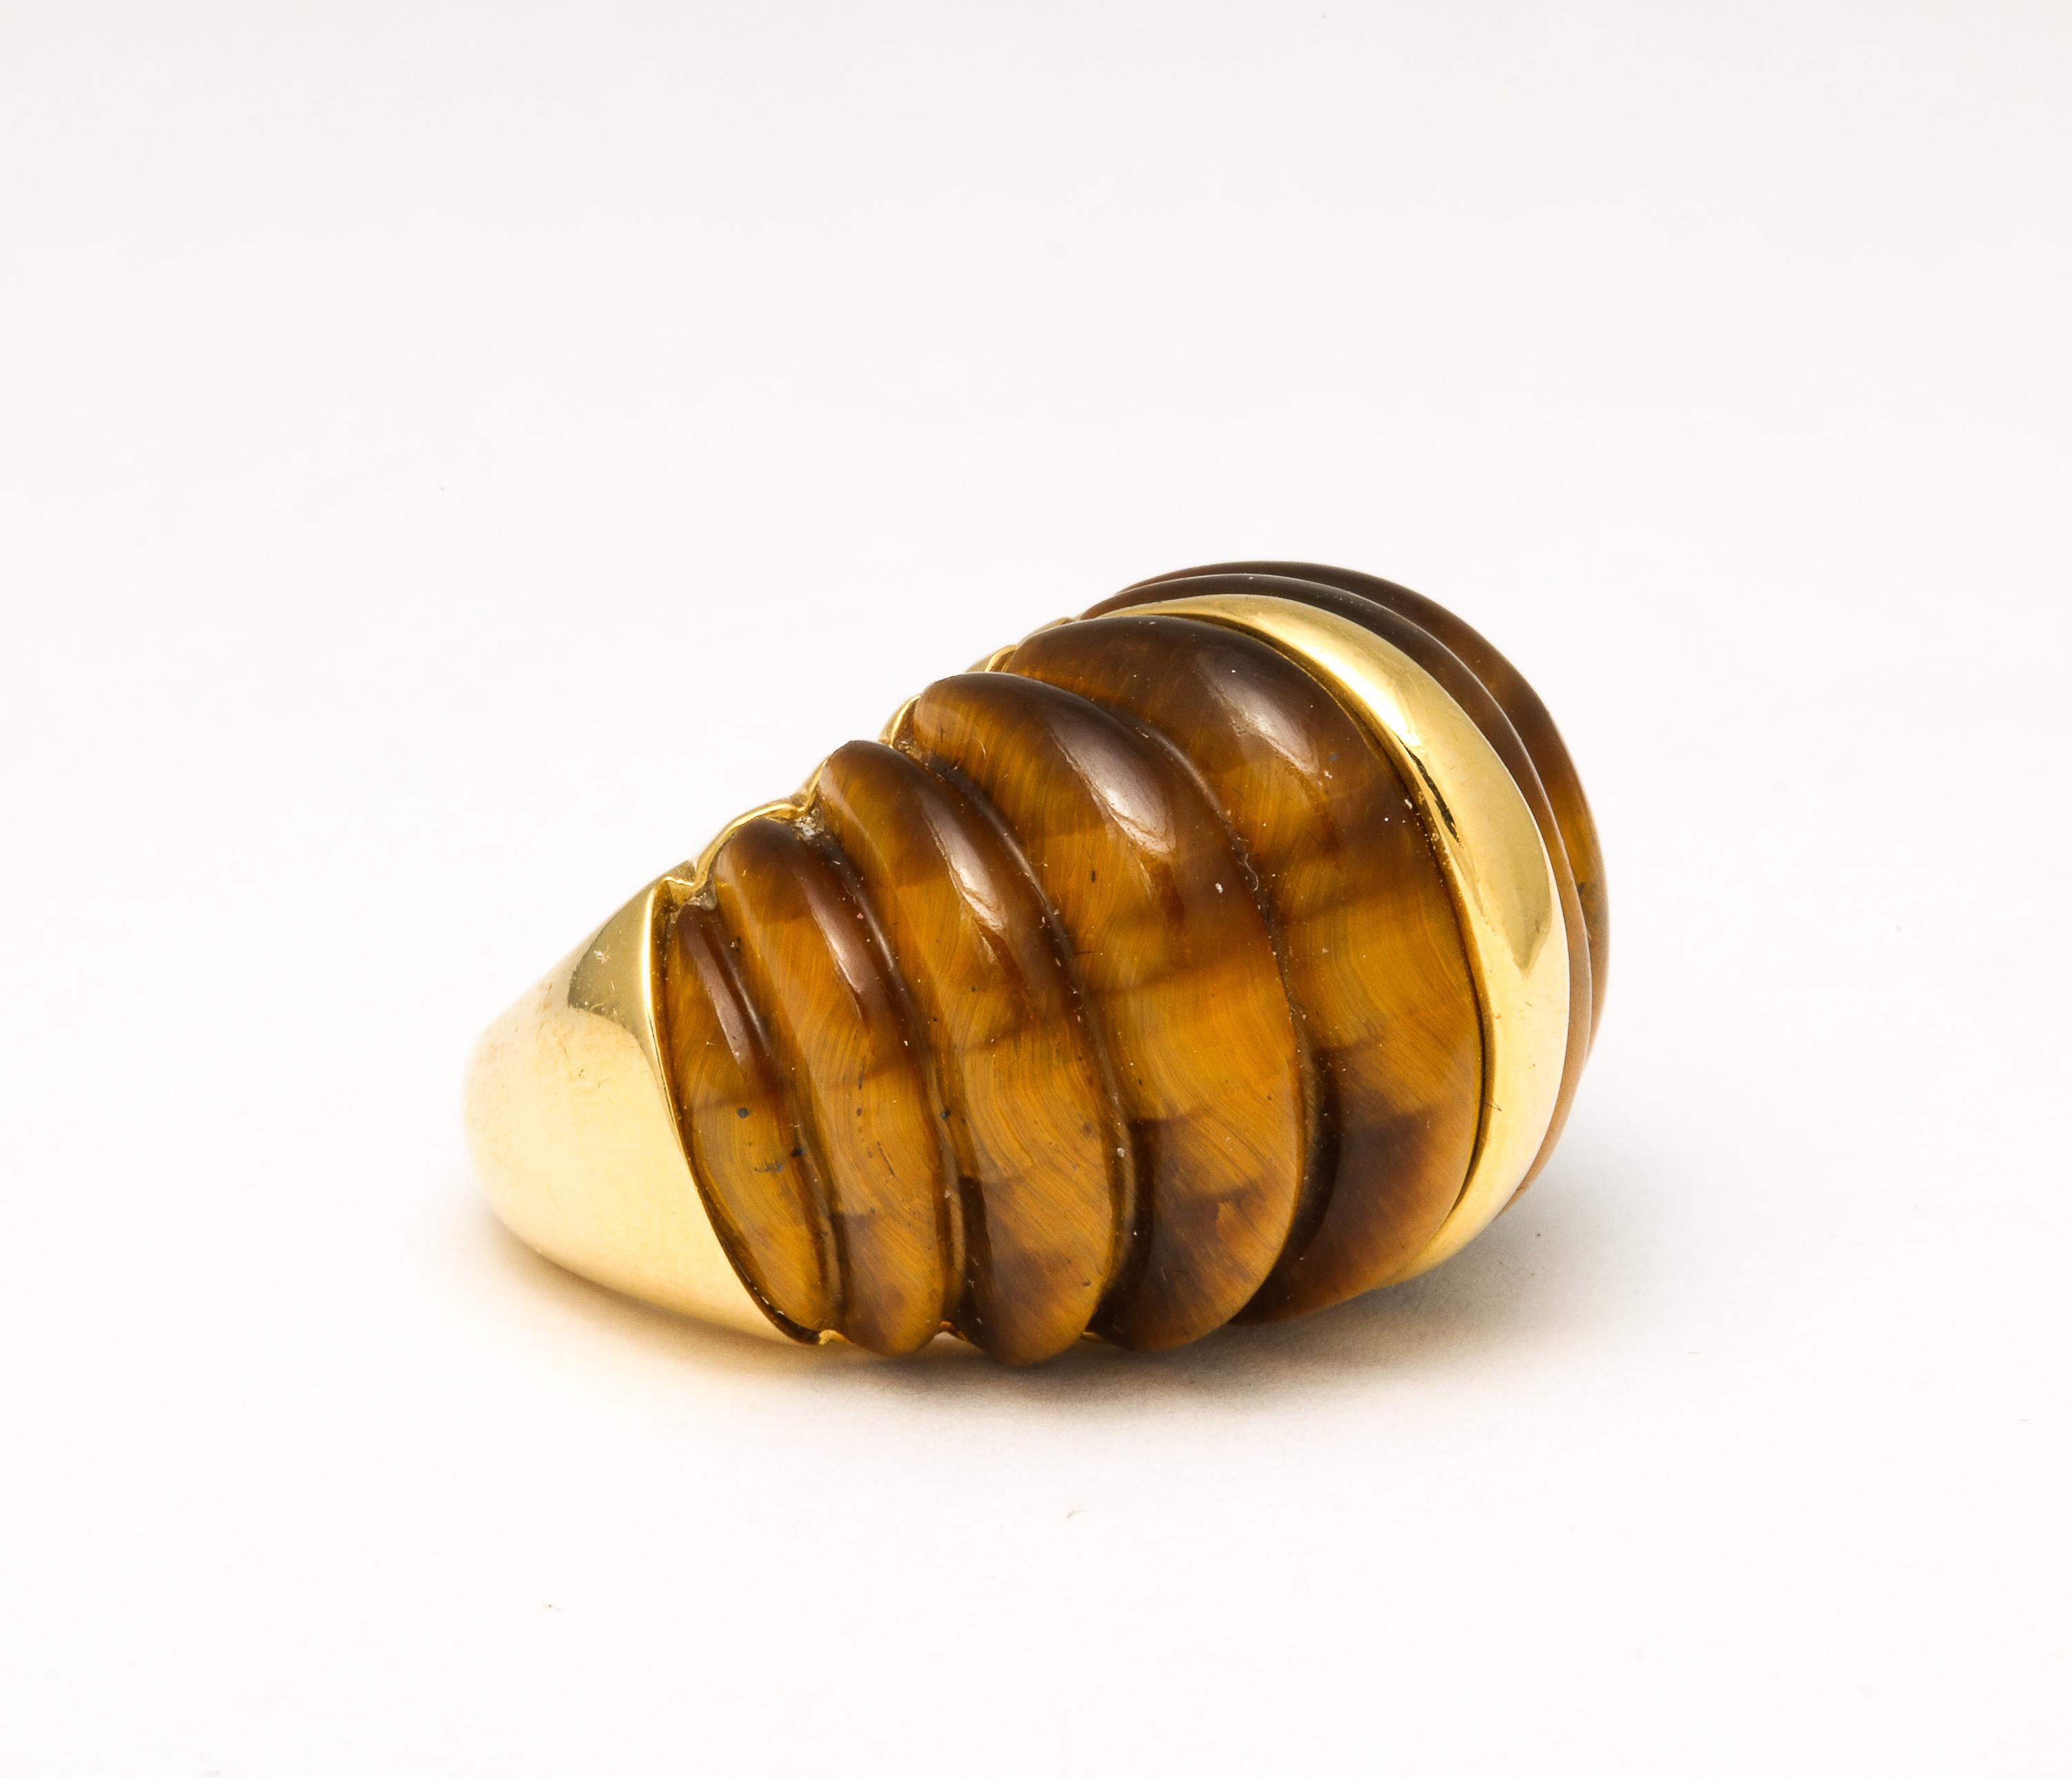 Cabochon Tiger's Eye Melon Shaped Ring with Center Gold Bar For Sale